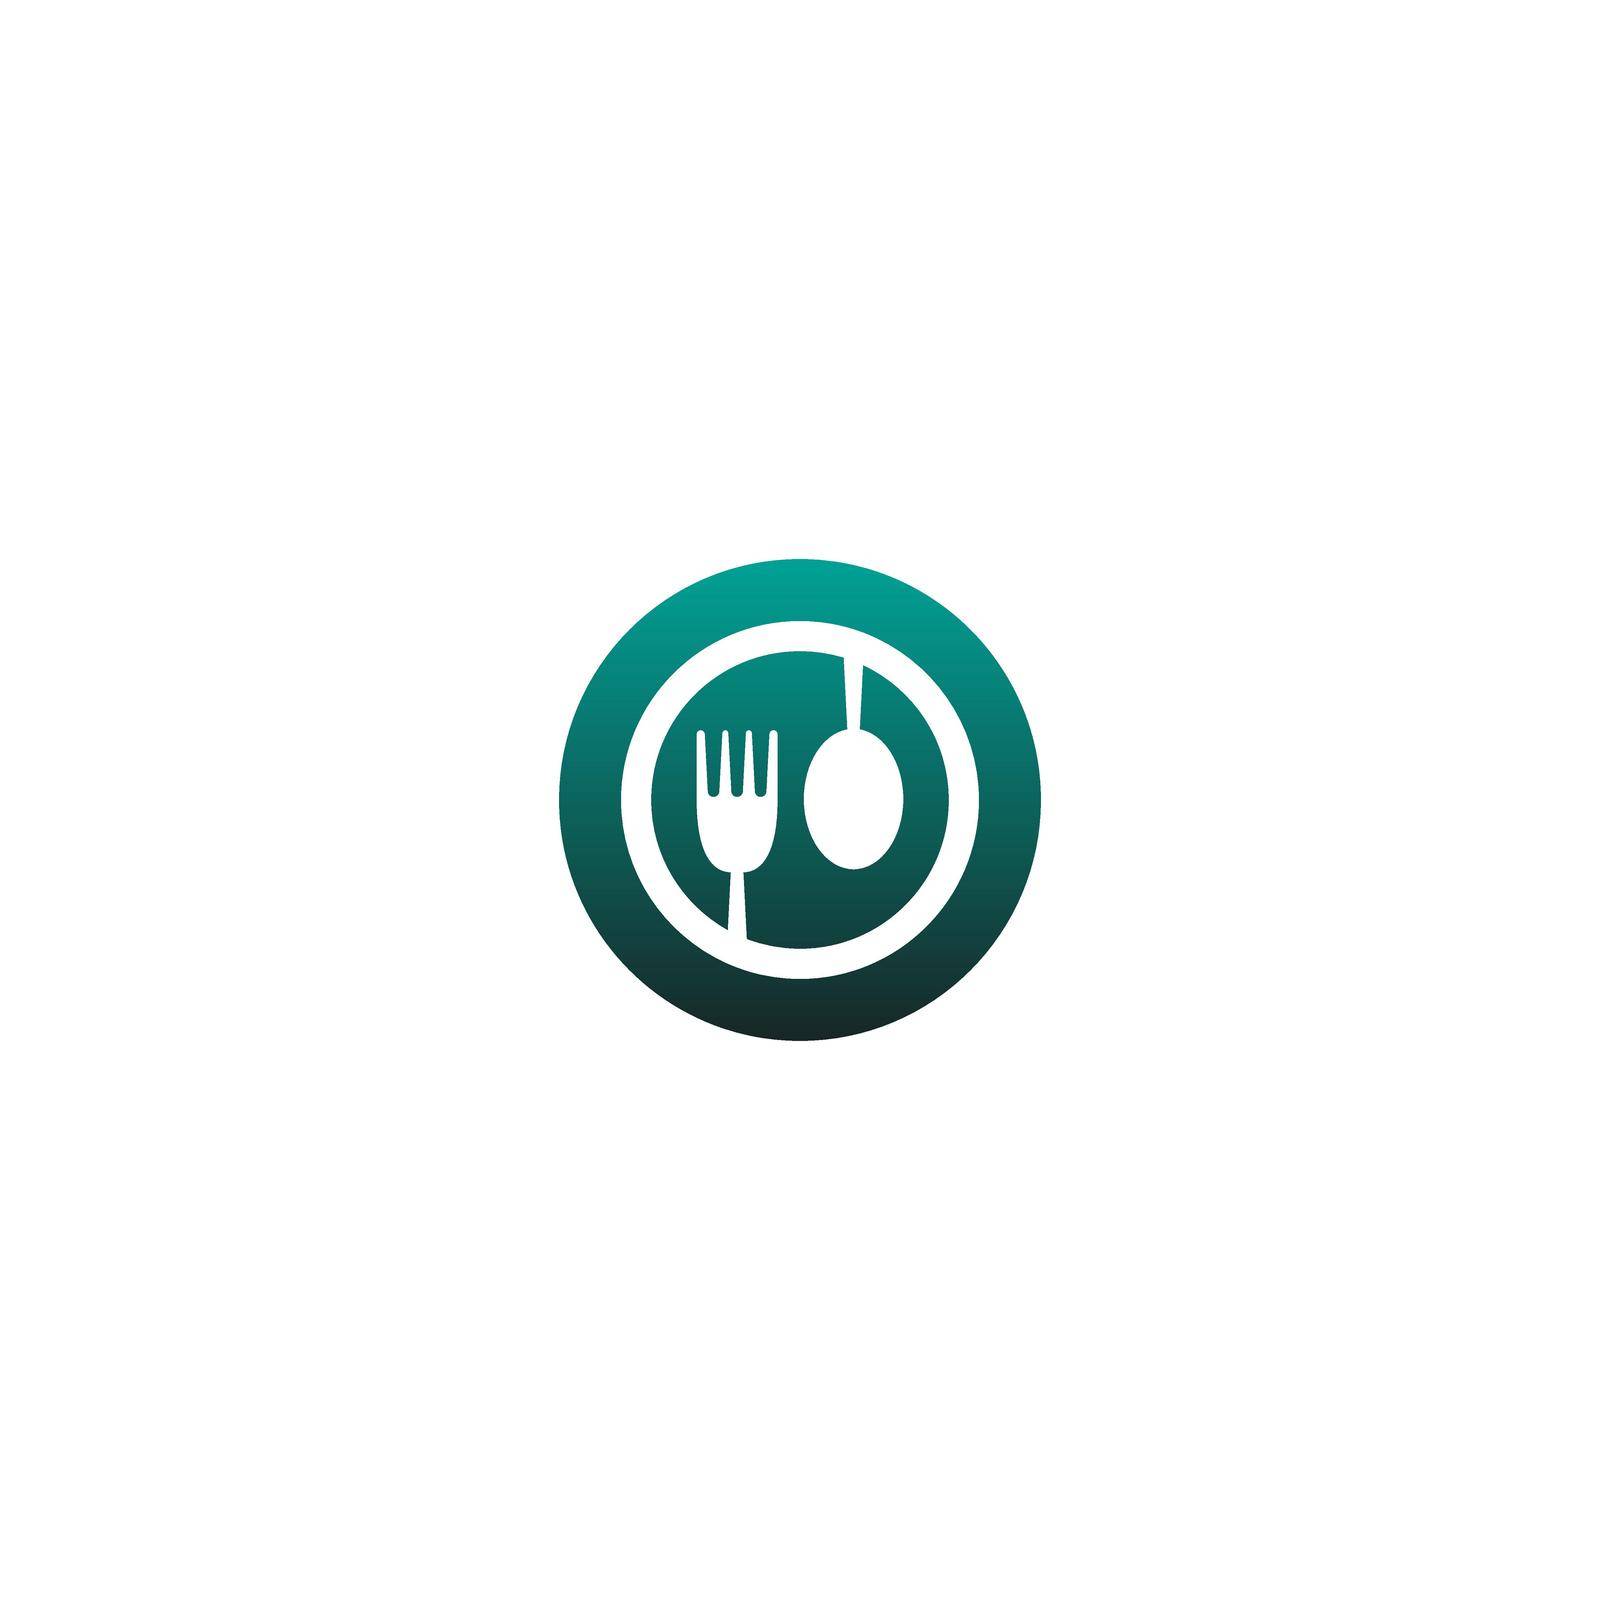 Fork and spoon icon vector by bellaxbudhong3